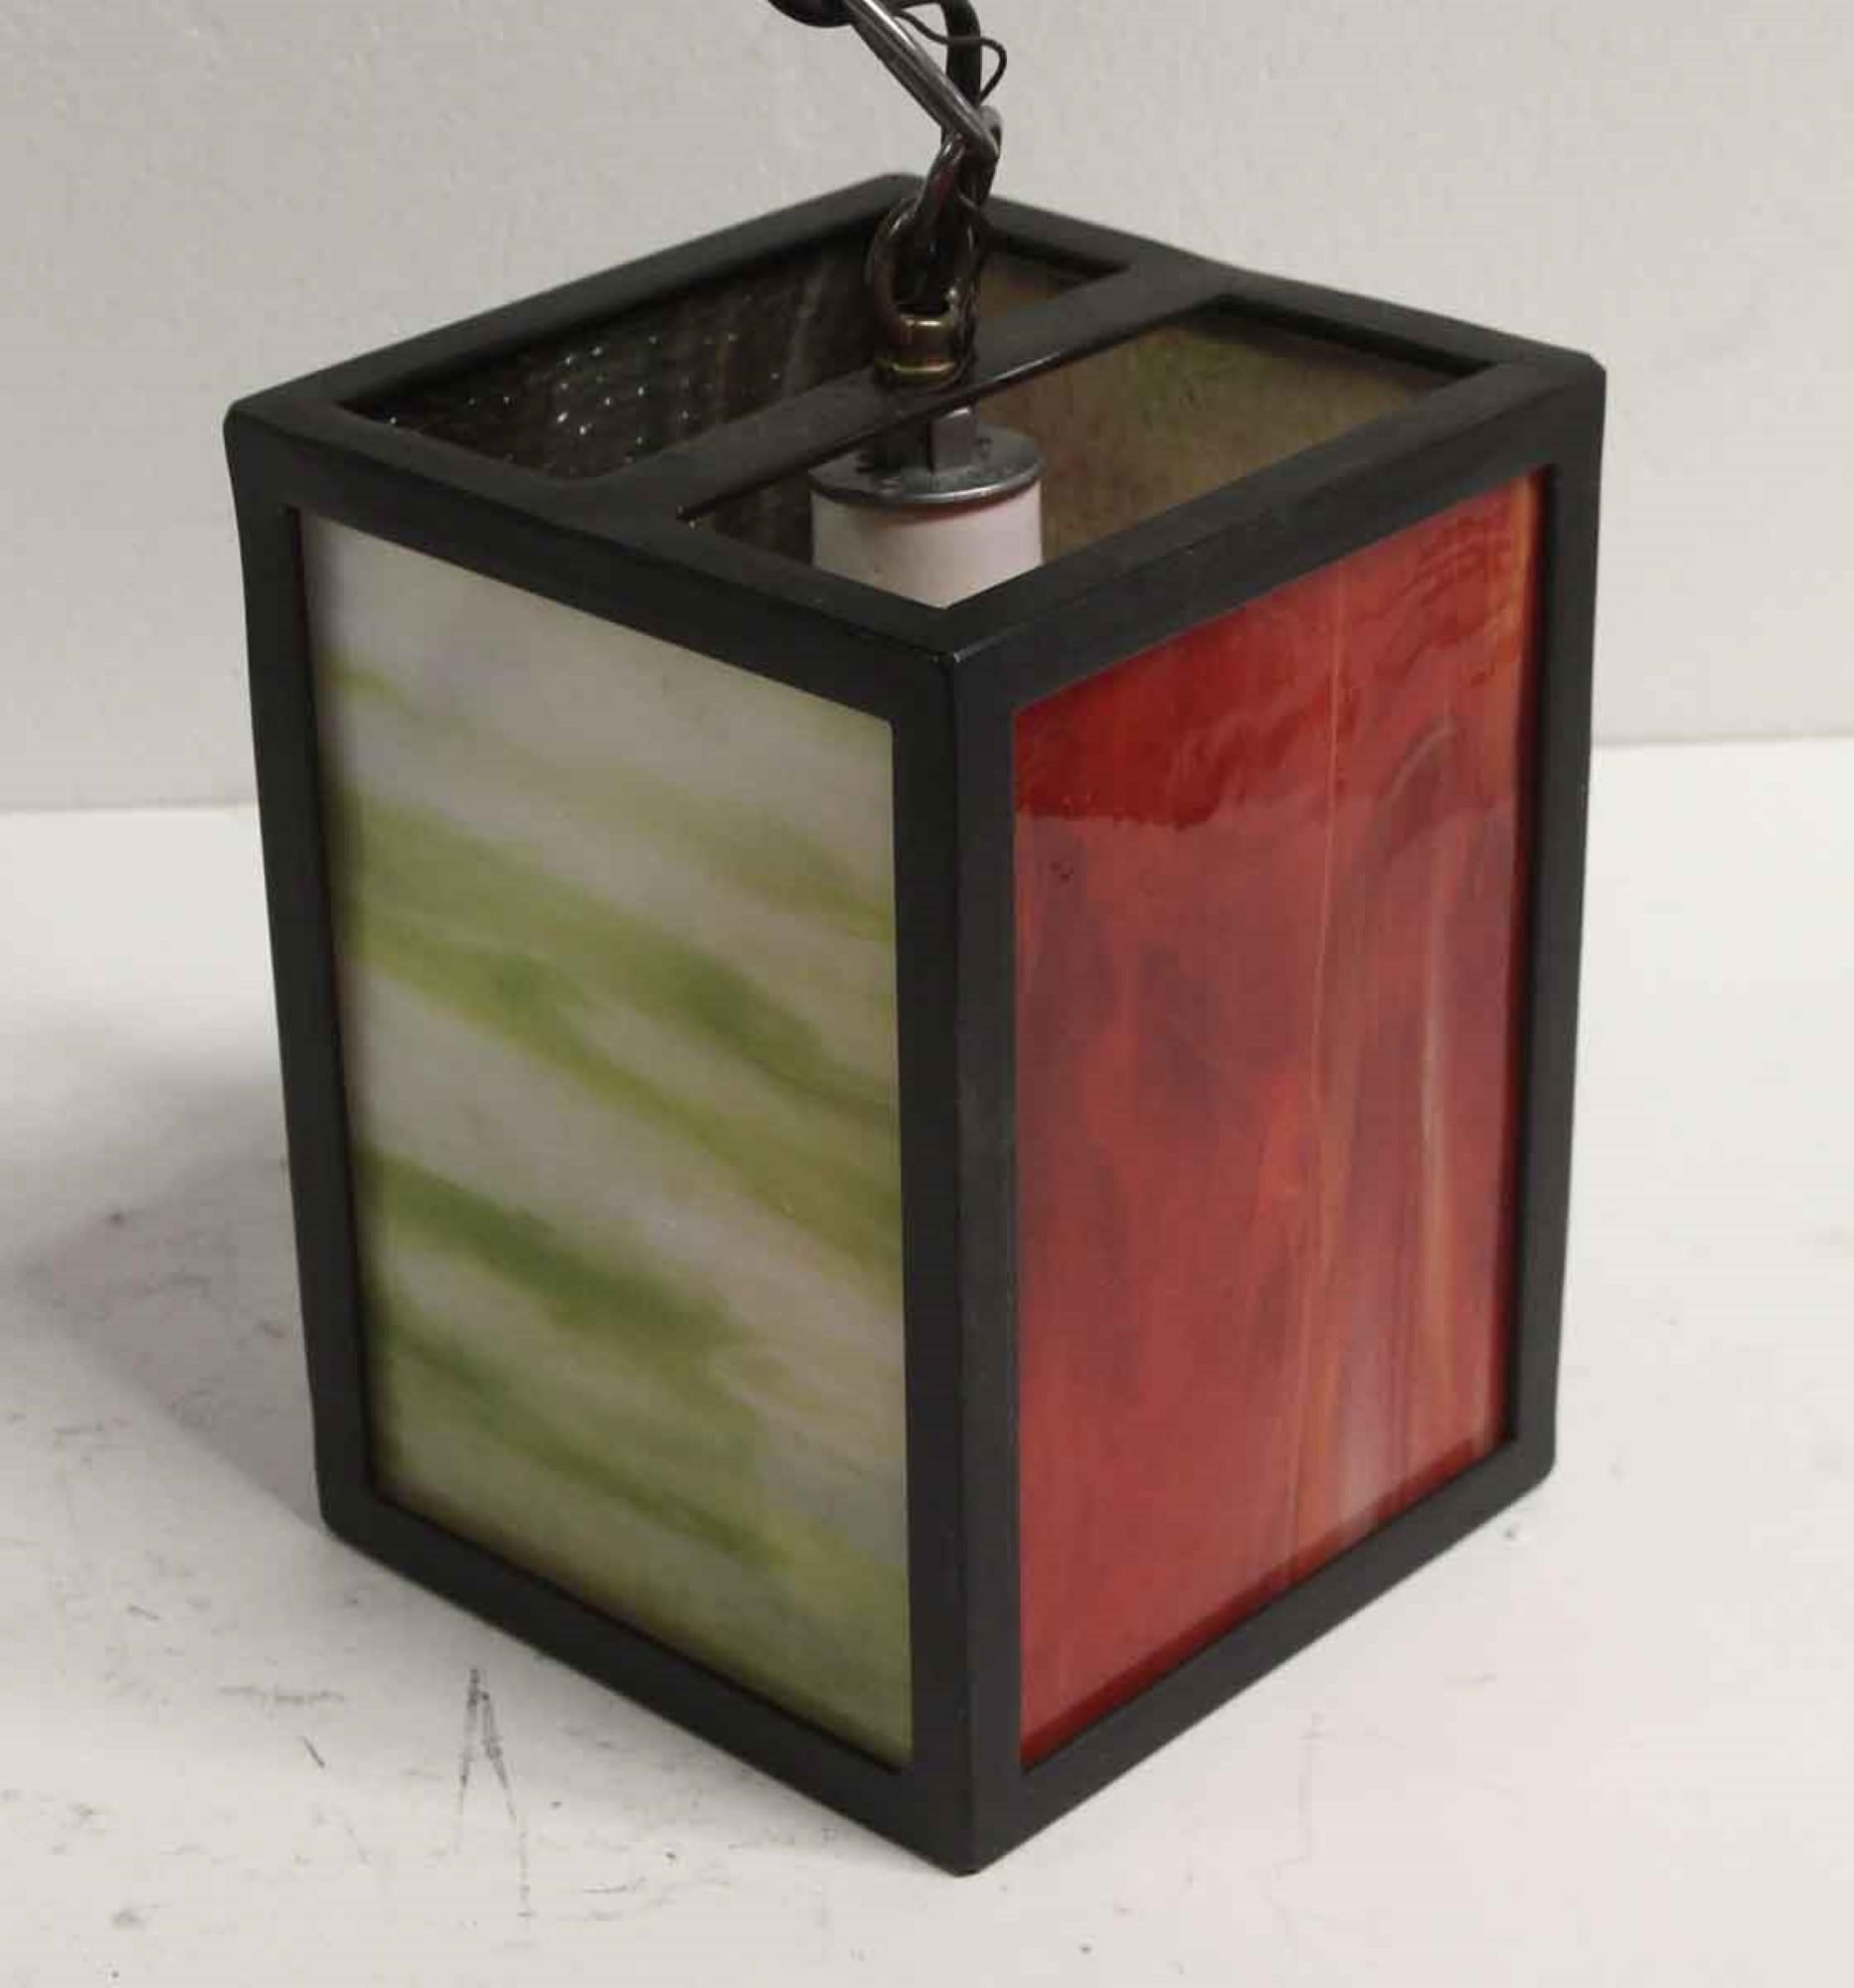 2010s Iron Lantern Pendant Light with Stained Glass Mid-Century Modern Style 1